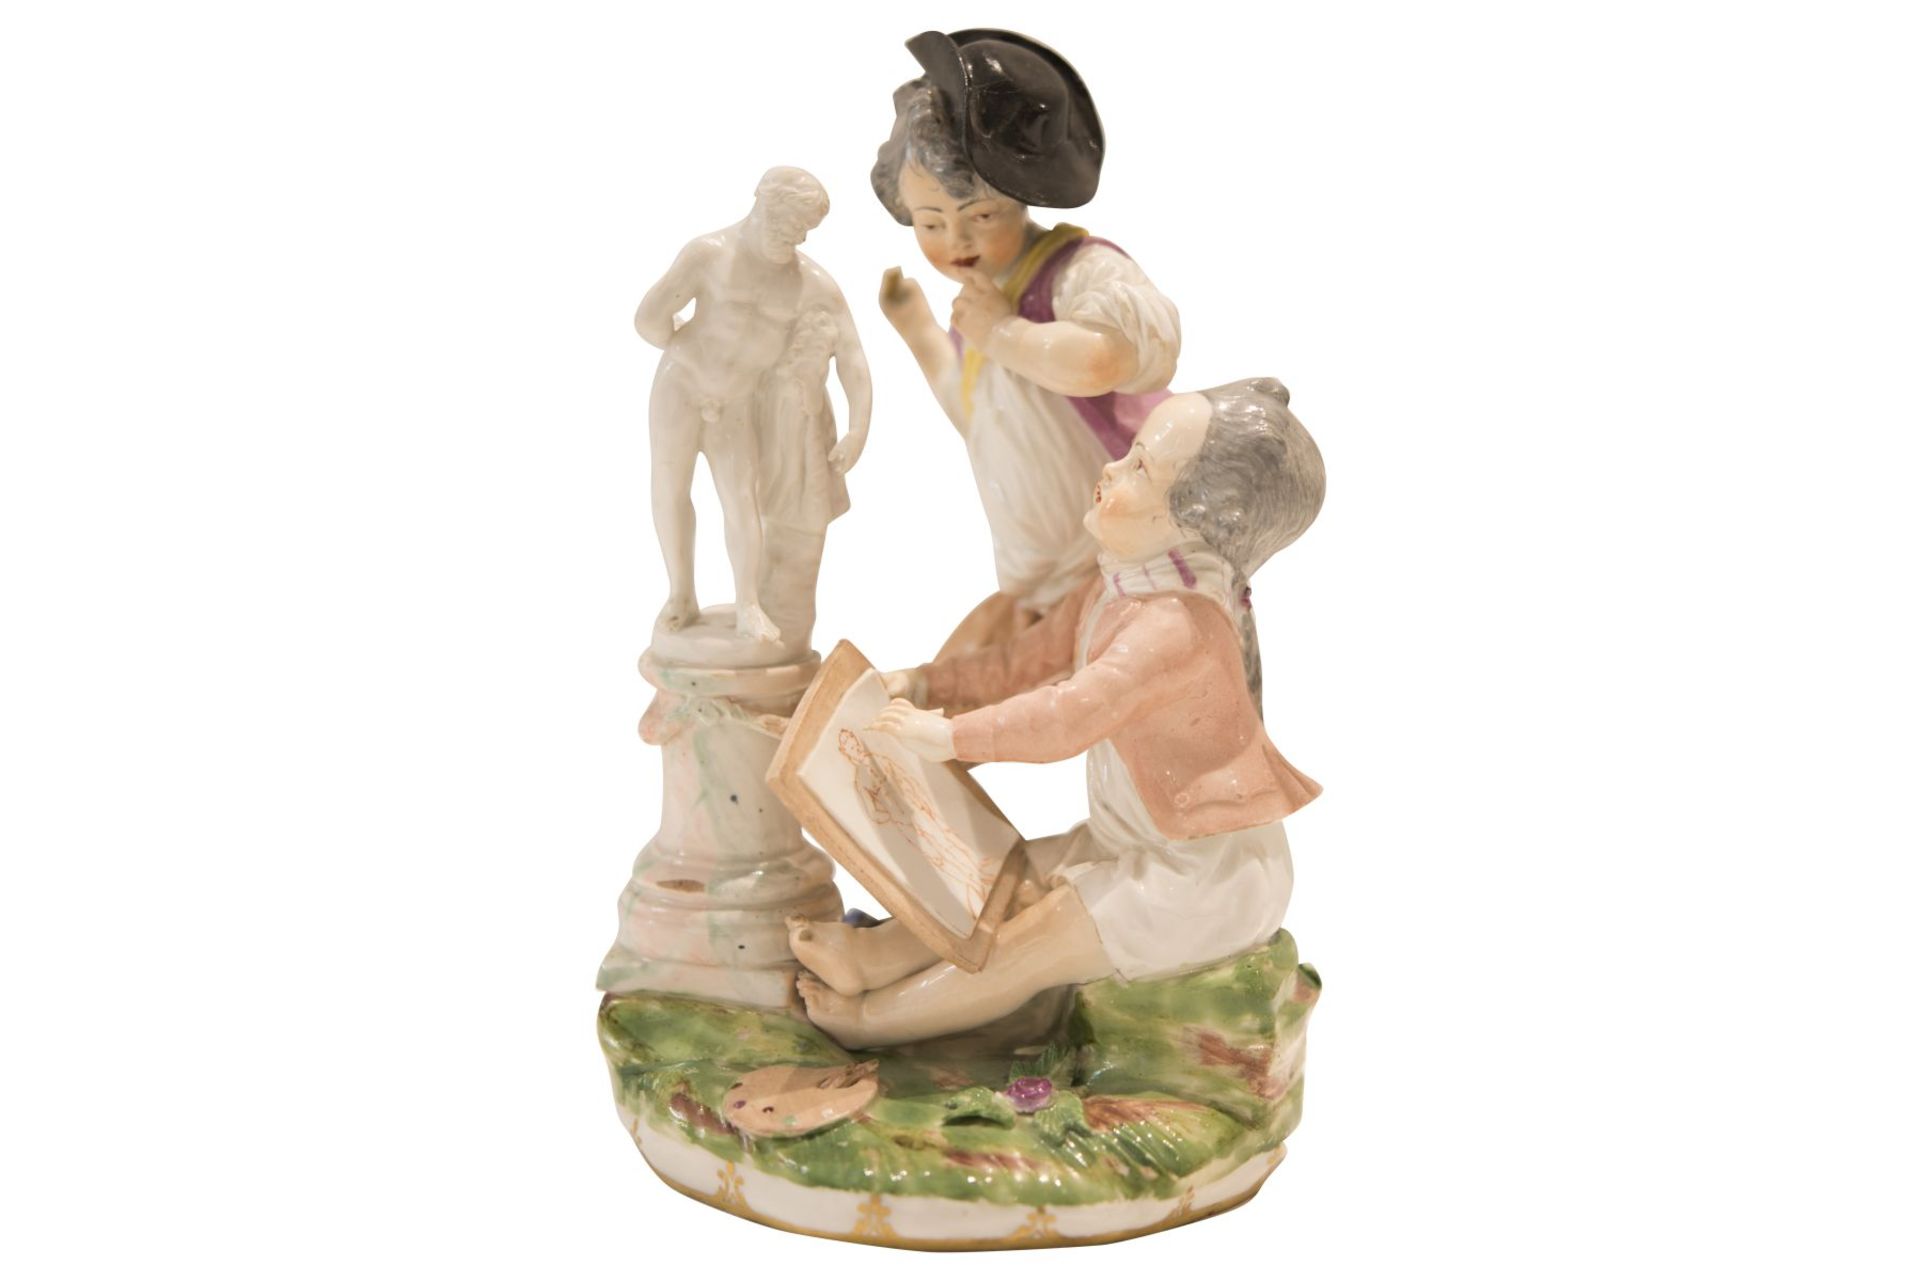 Figures group "Painters" Viennese Porcelain Manufacture 18th century - Image 5 of 6